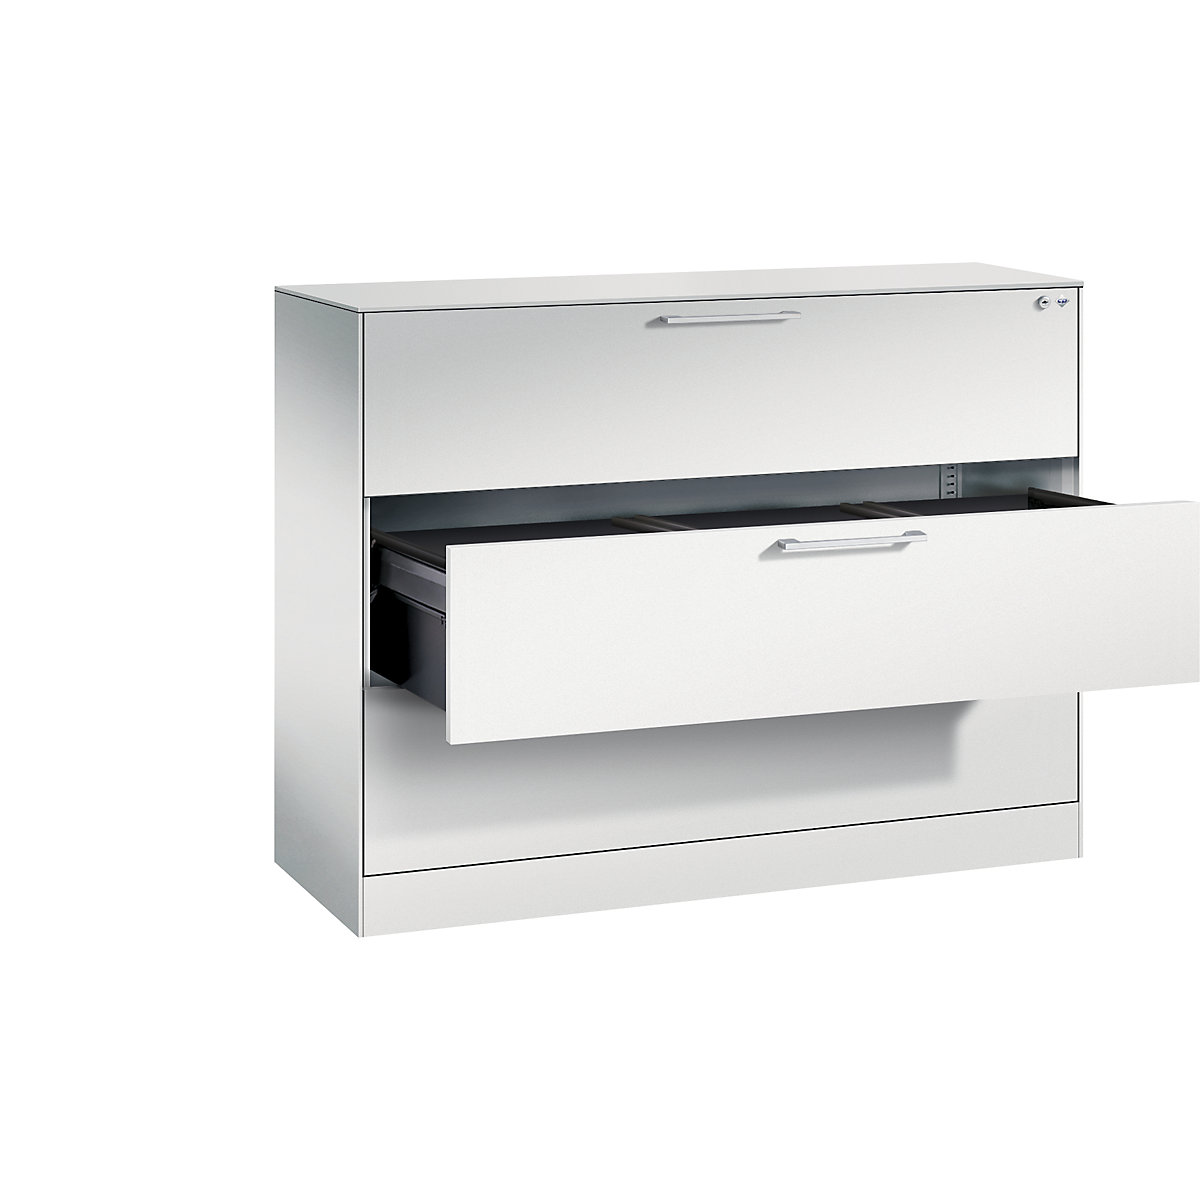 ASISTO suspension filing cabinet – C+P, width 1200 mm, with 3 drawers, light grey/light grey-9